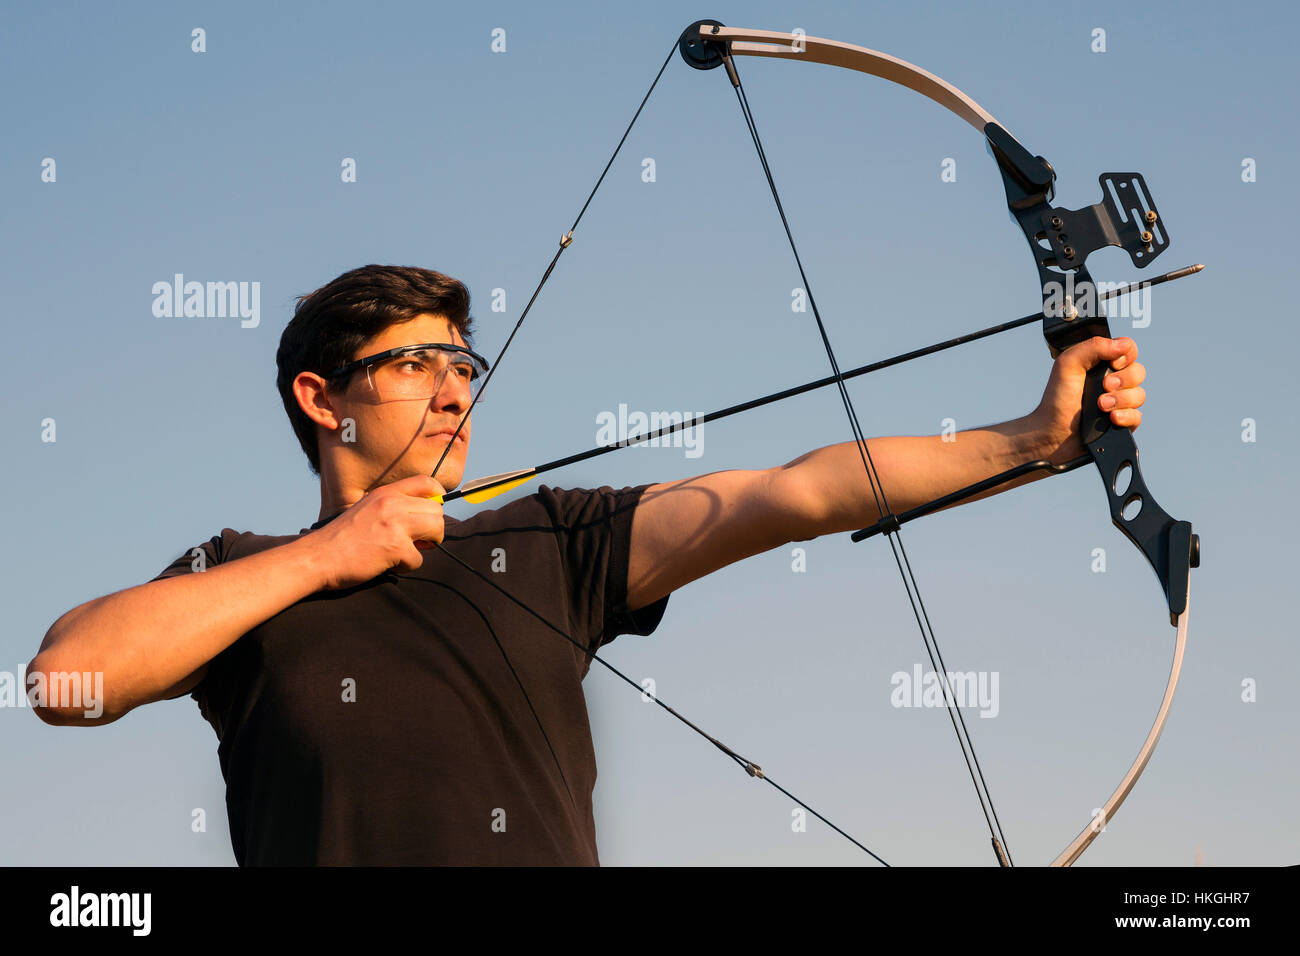 An archer draws his compound bow and aims upwards with clean blue sky as background. Stock Photo